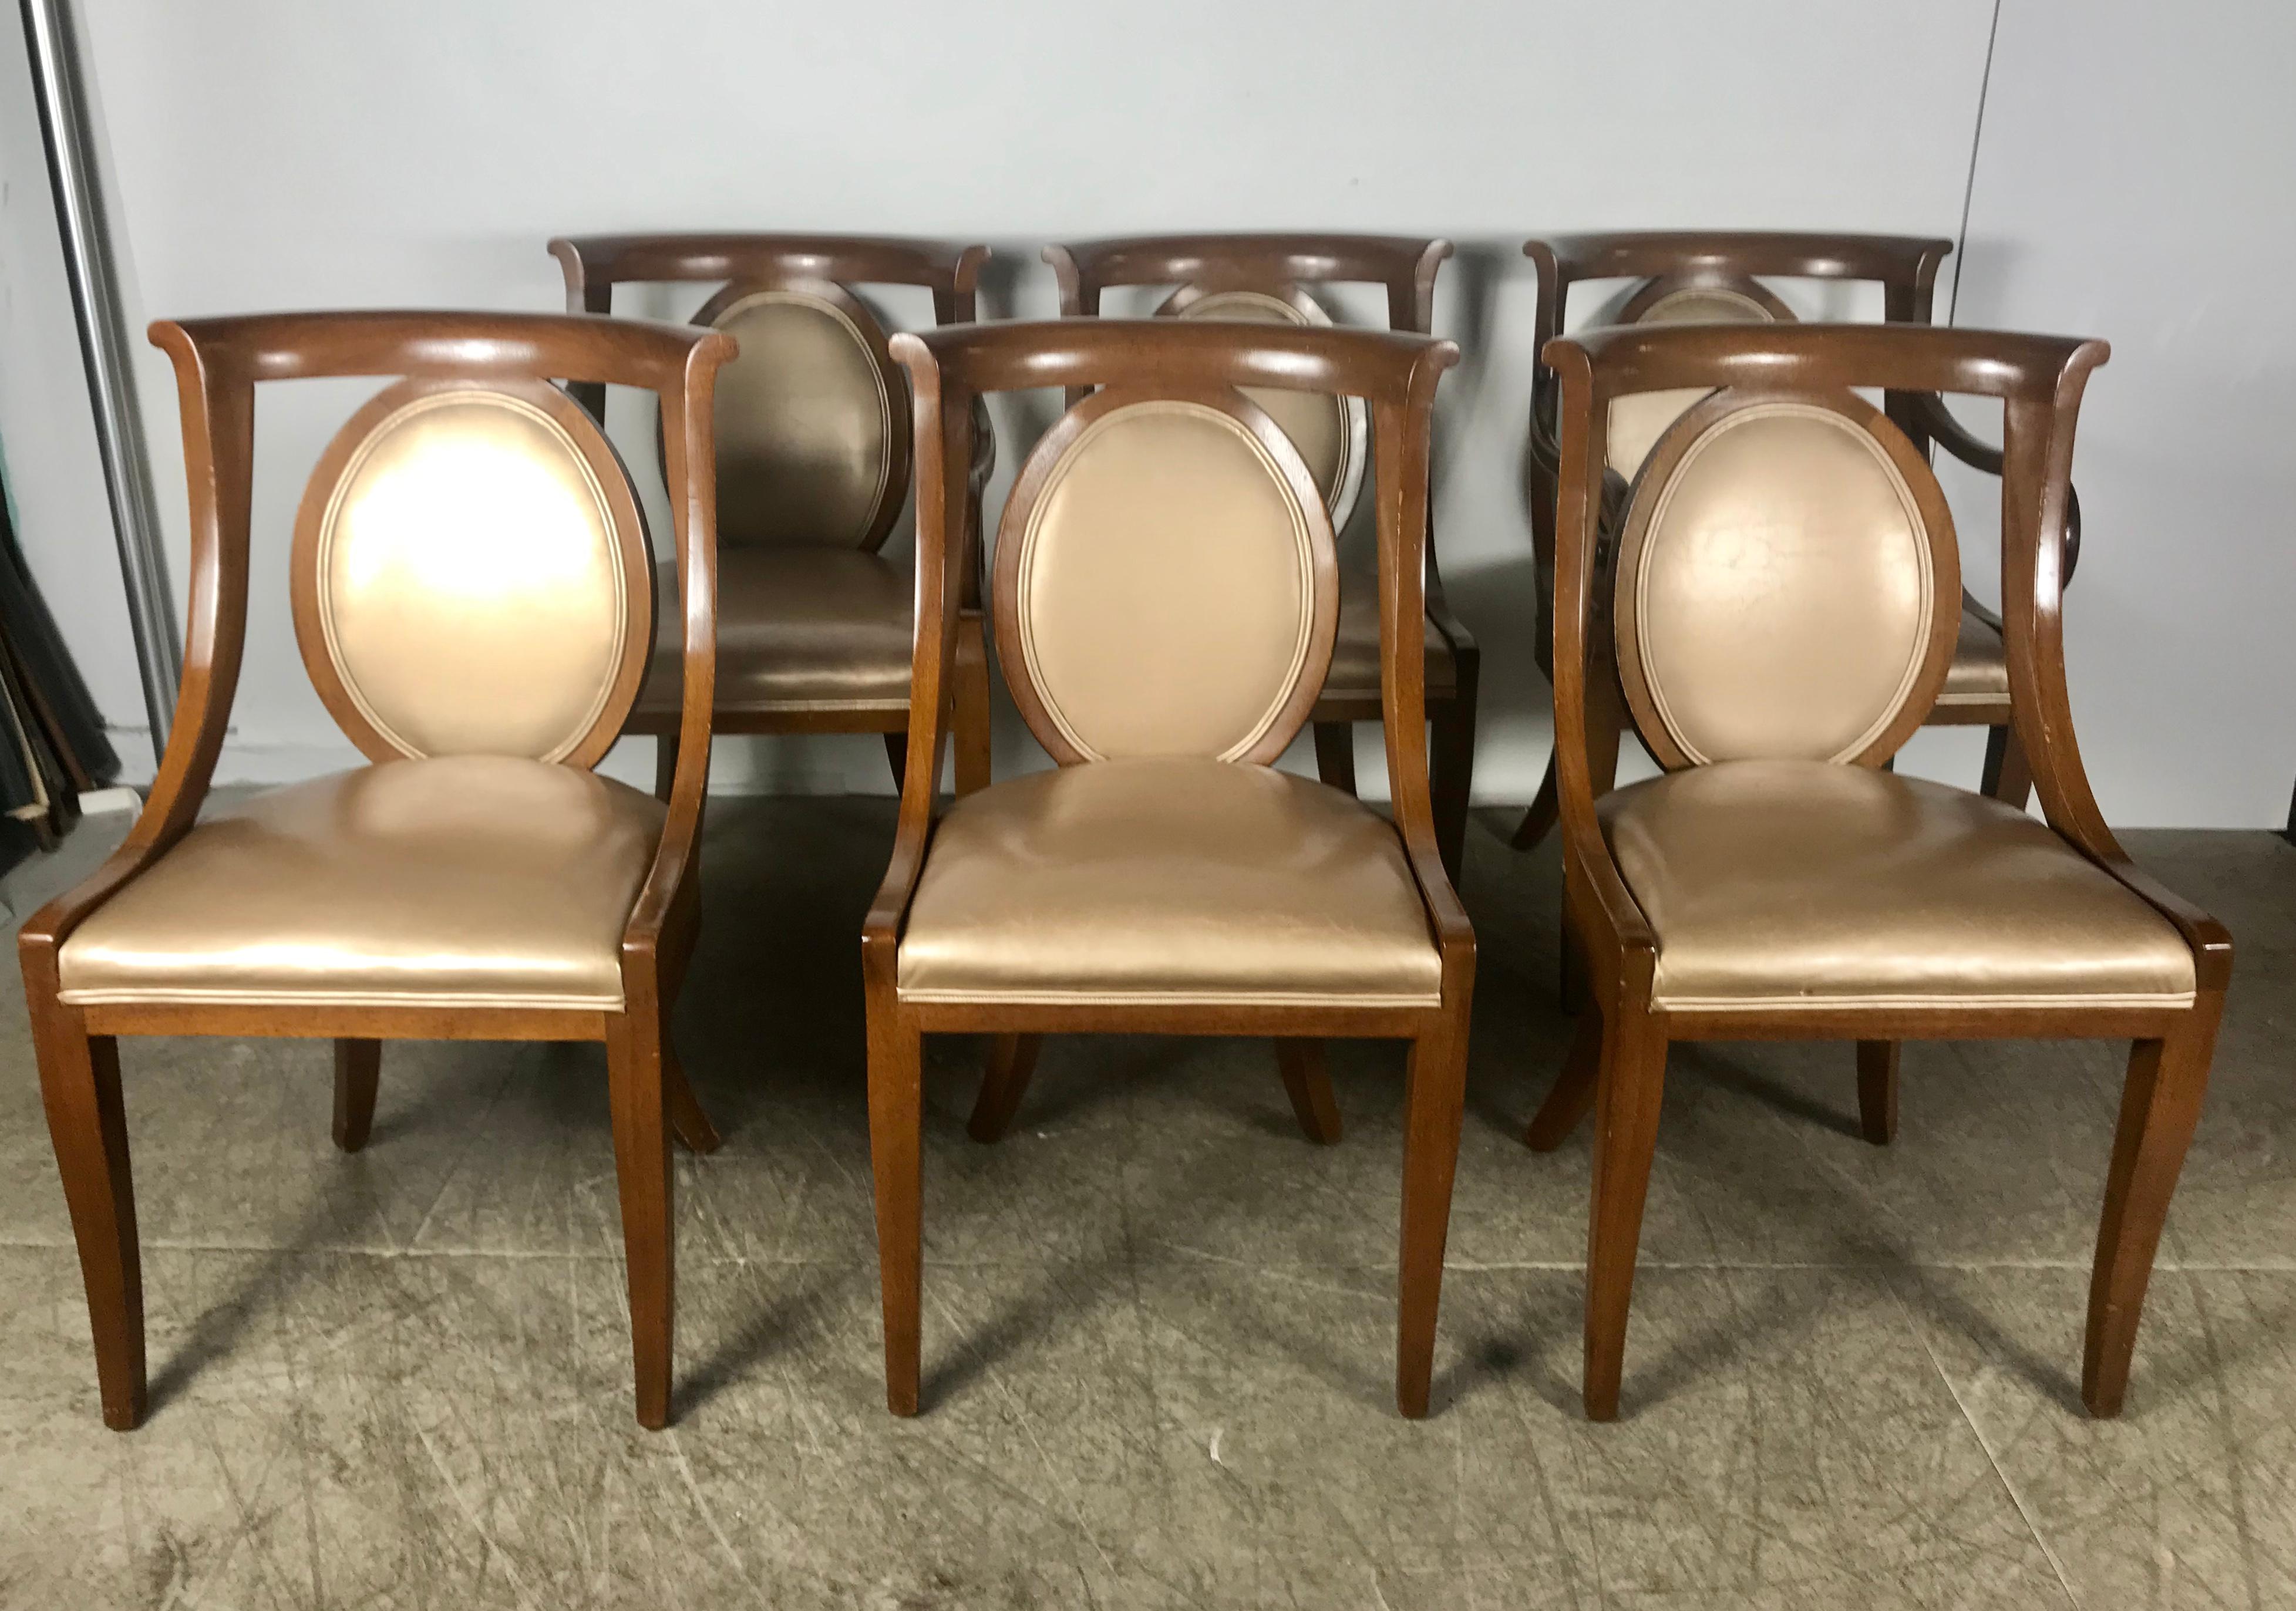 Classic set of 6 Regency dining chairs by Bethlehem Furniture Manufacturing Corp. Wonderful design, set retains 2 arm (captains) chairs 21